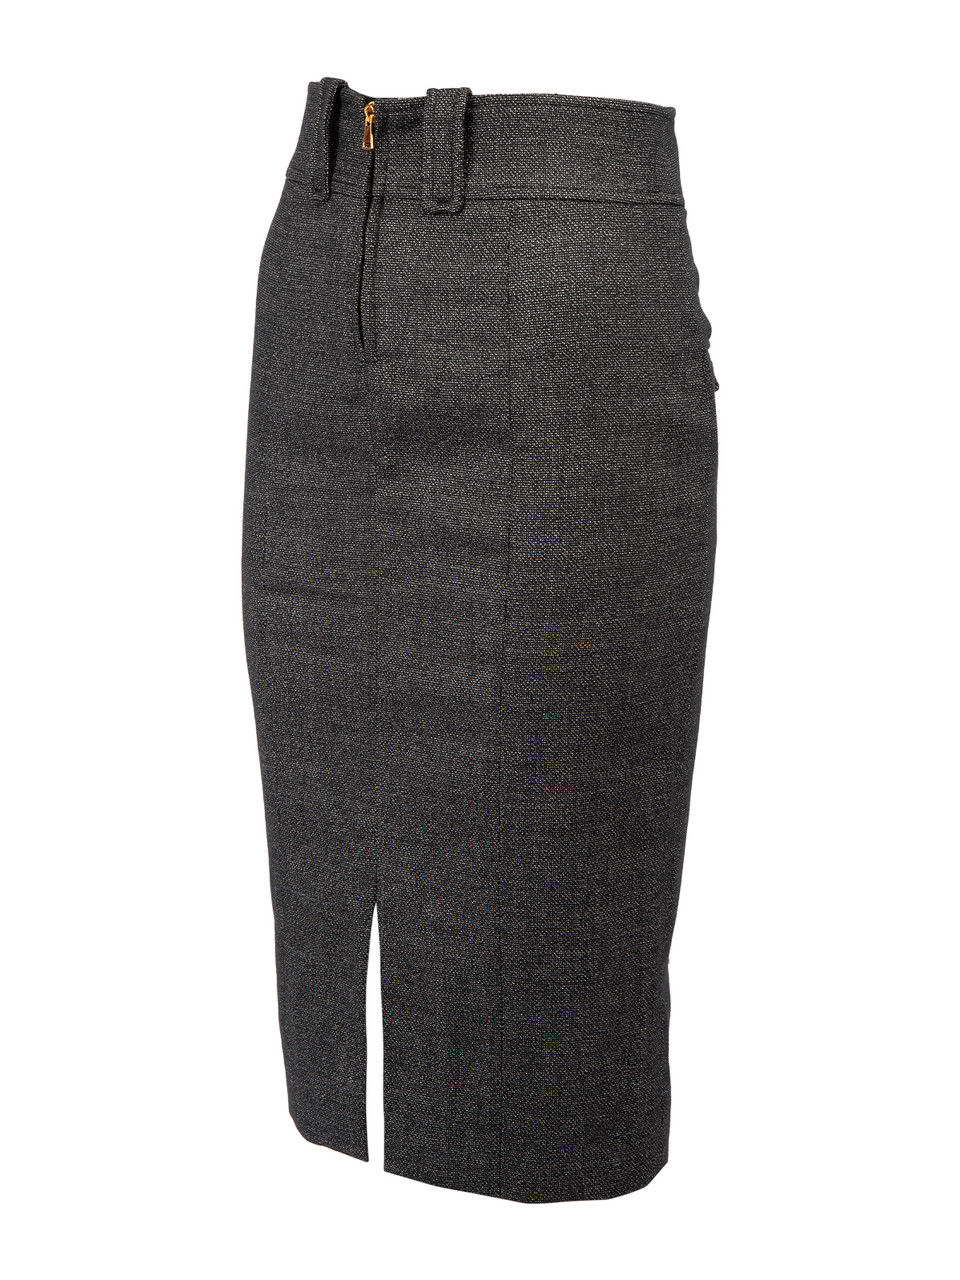 Tom Ford Grey Zip Up Pencil Skirt